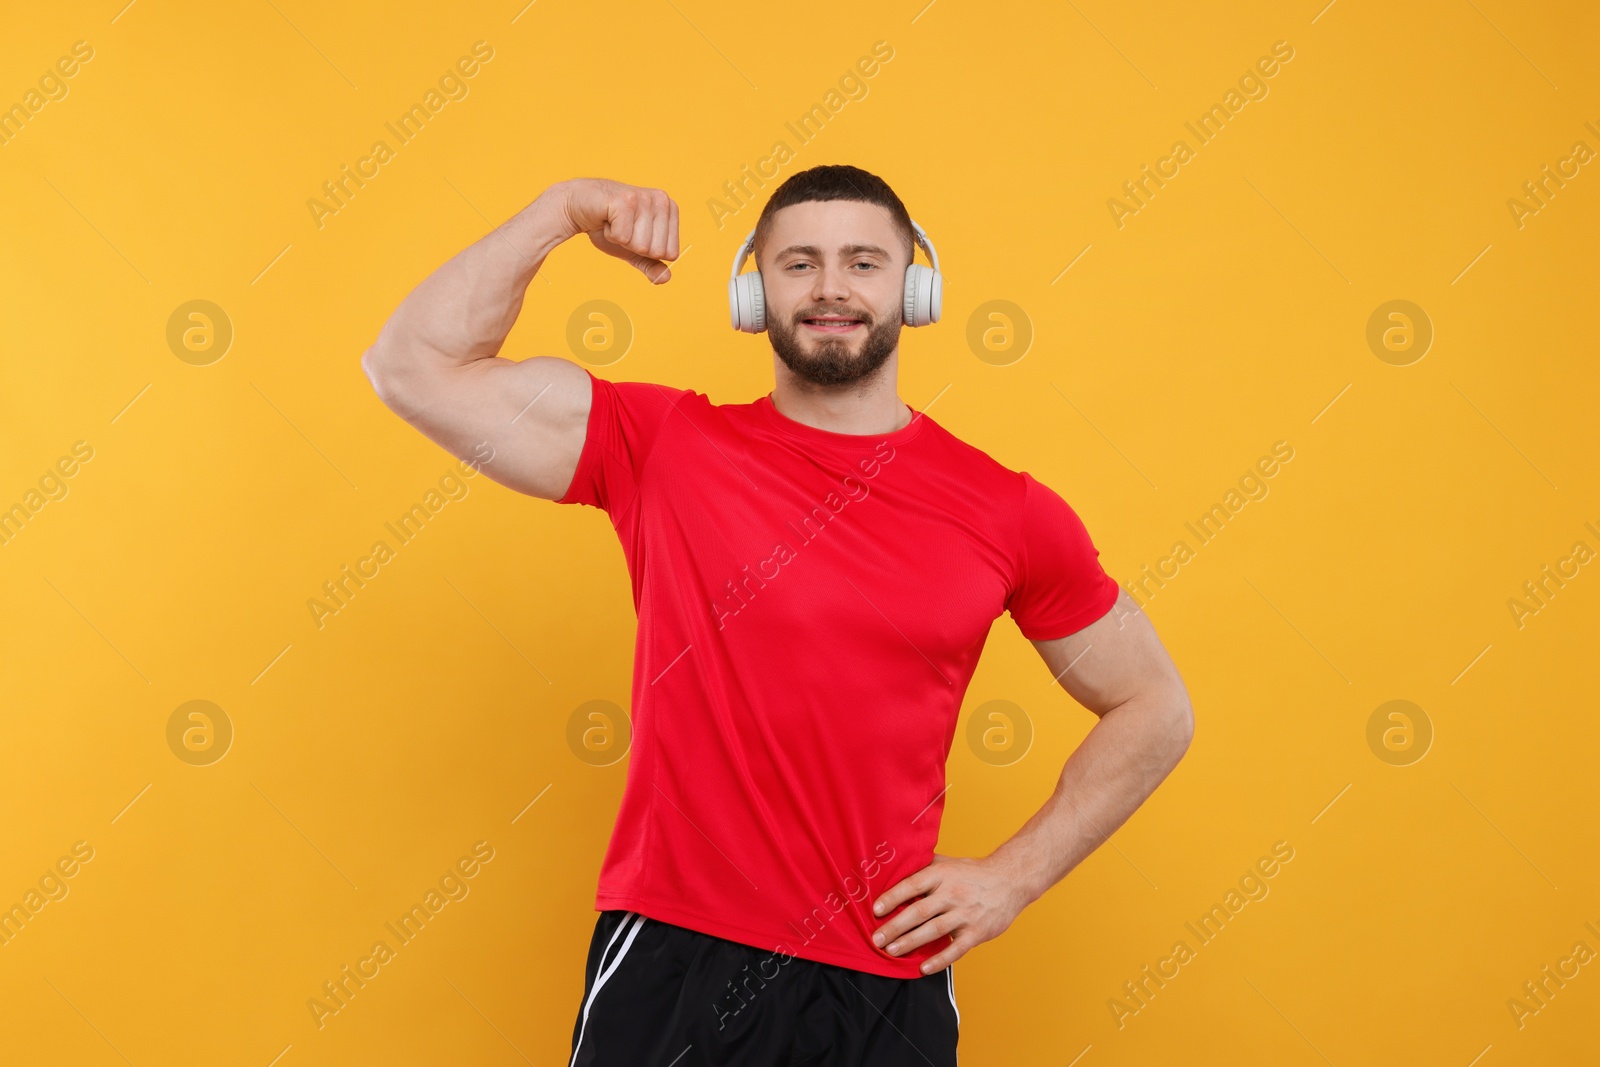 Photo of Handsome man with headphones showing muscles on yellow background